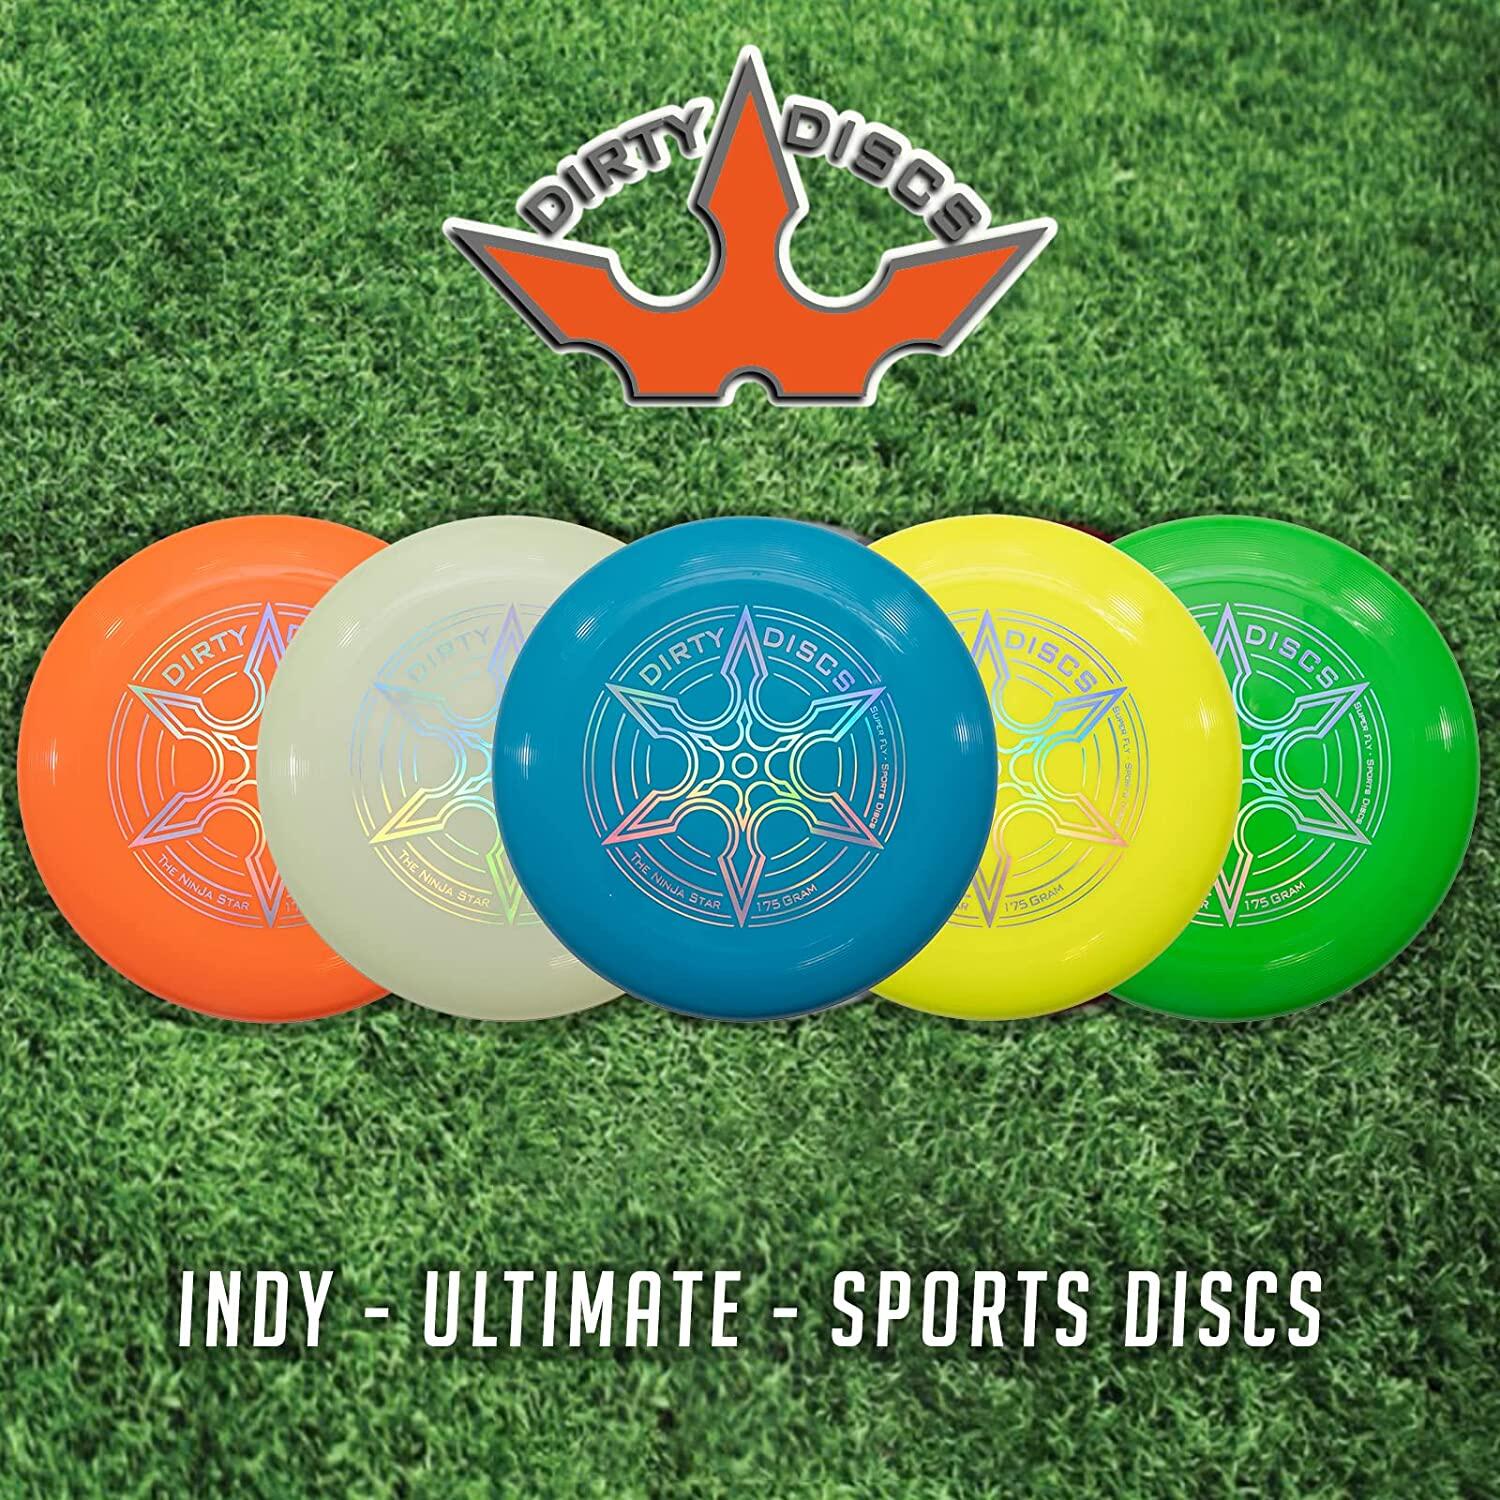 Indy - Dirty Disc Frisbee, Professional Throwing Disc for Adults, Childre 2/5